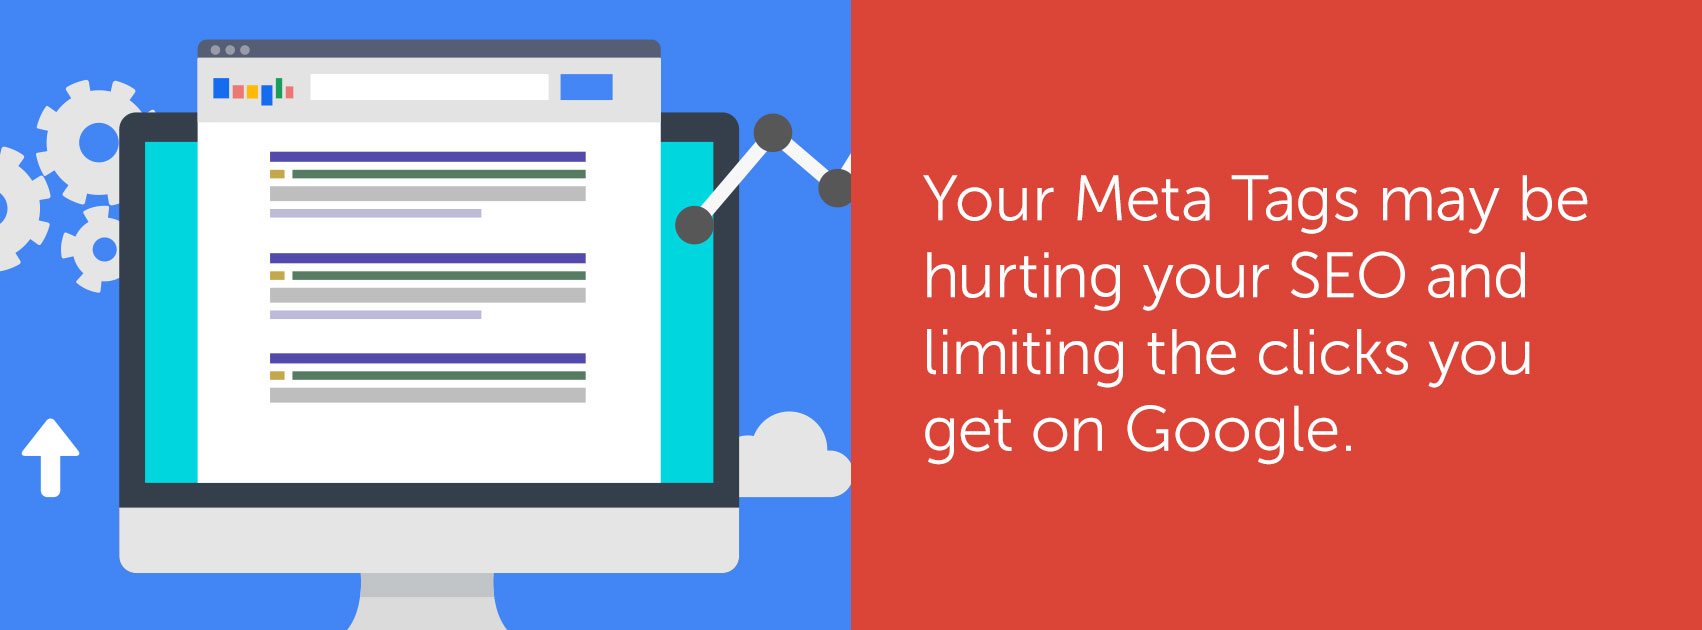 Your Meta Tags may be hurting your SEO and limiting the clicks you get on Google.